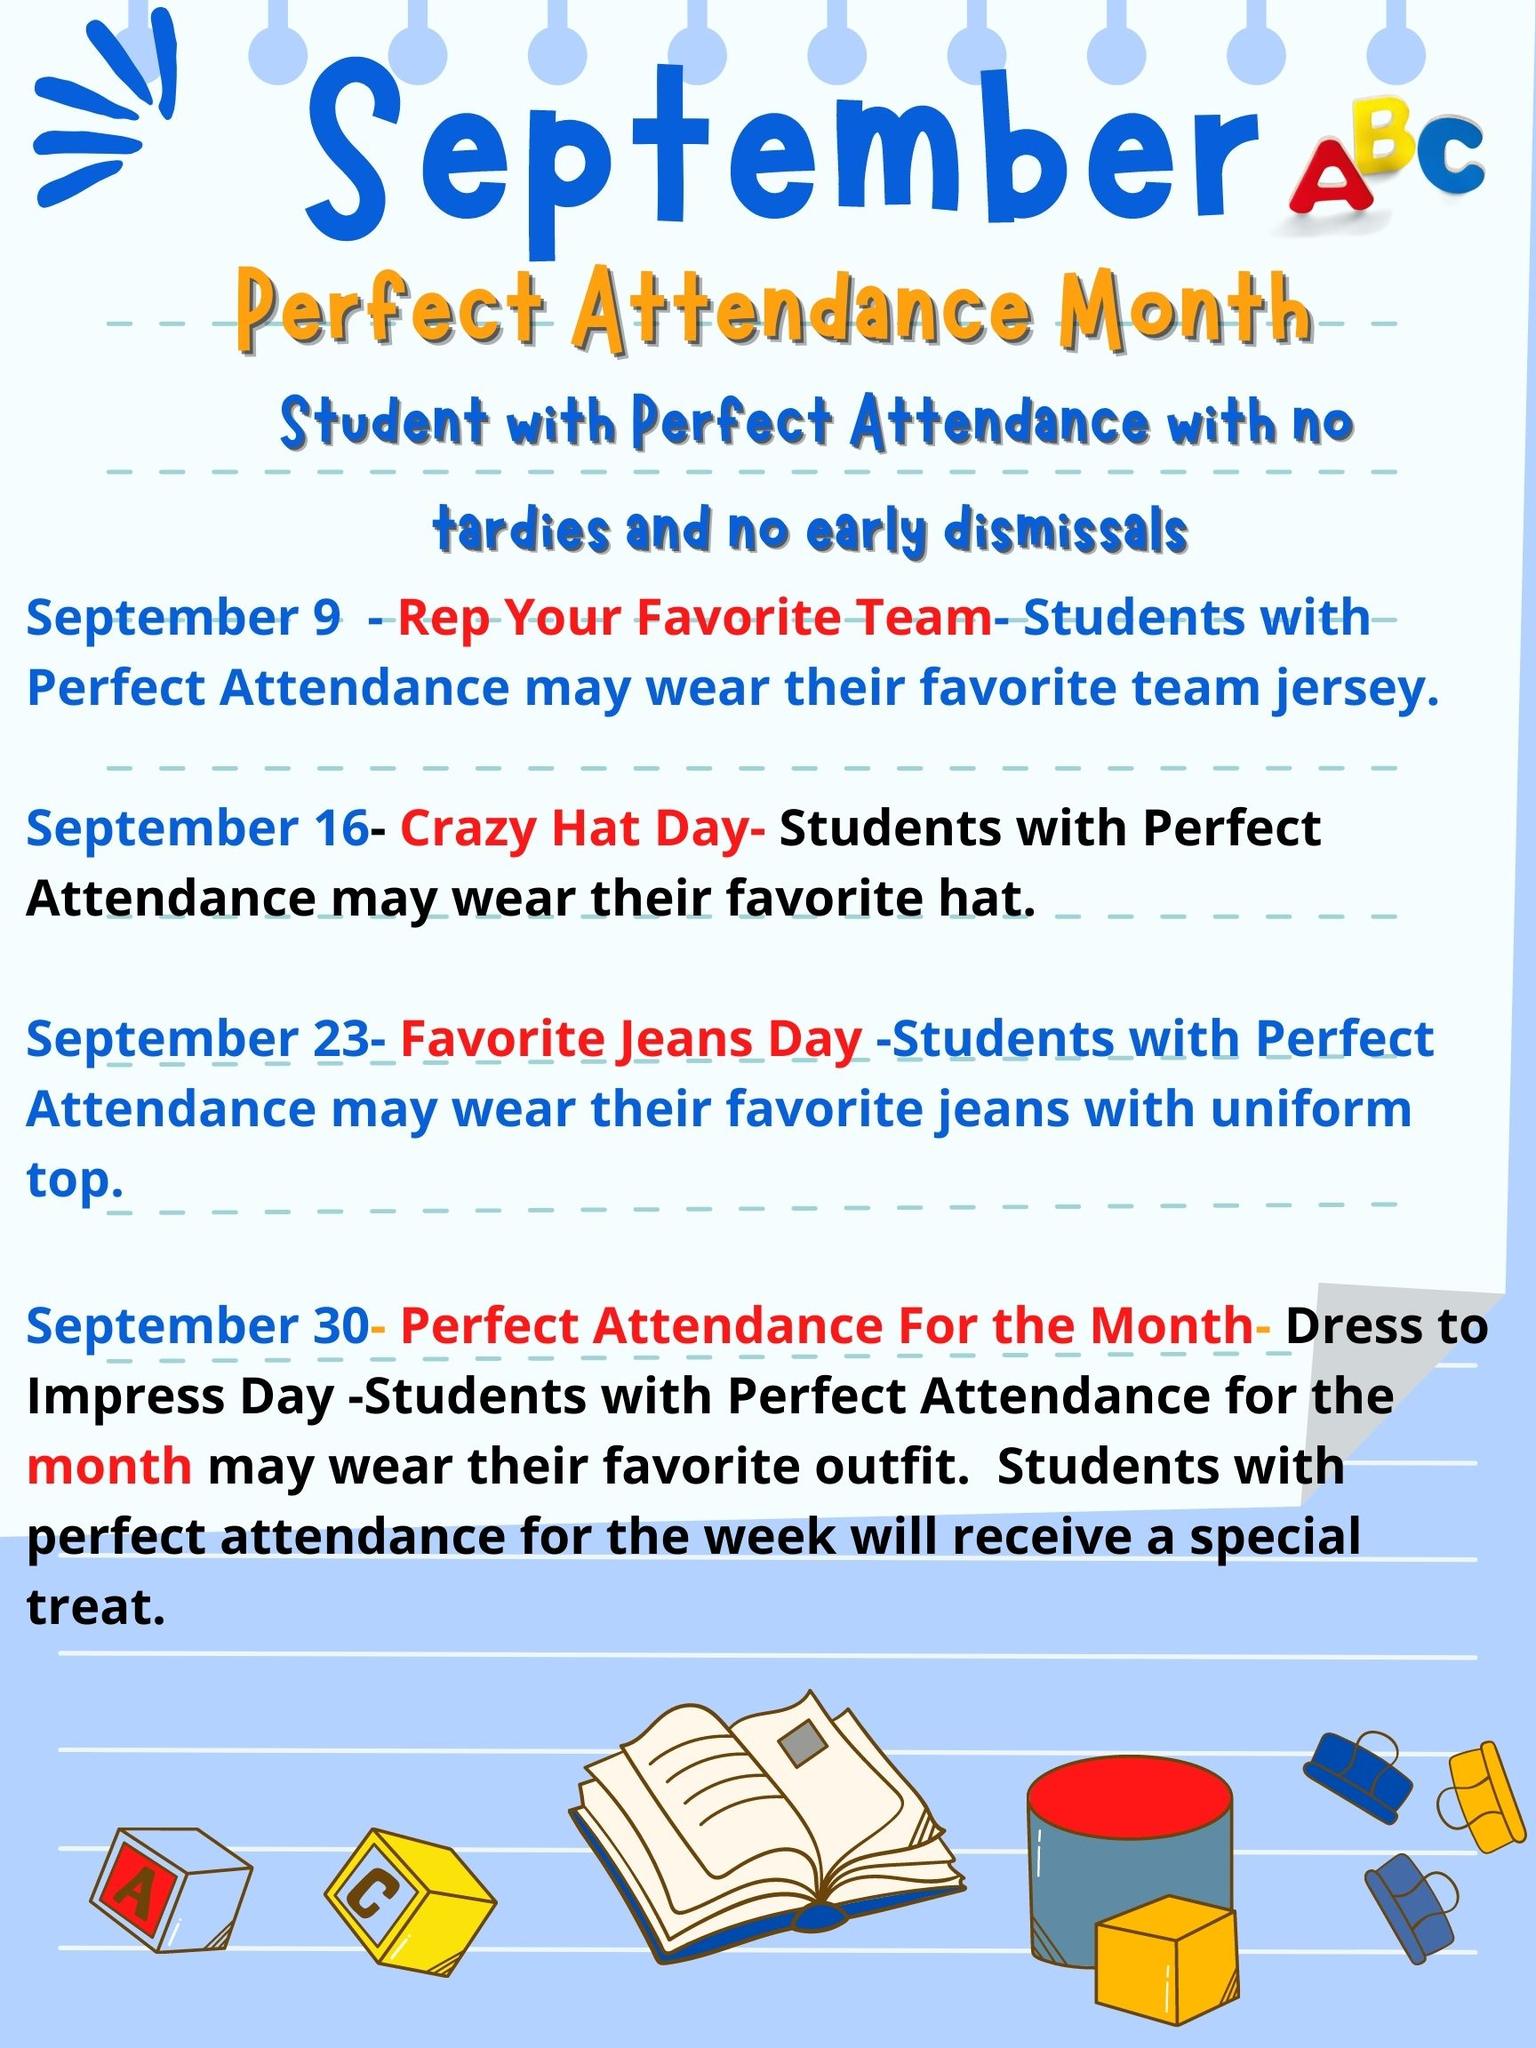 September is Perfect Attendance Month!